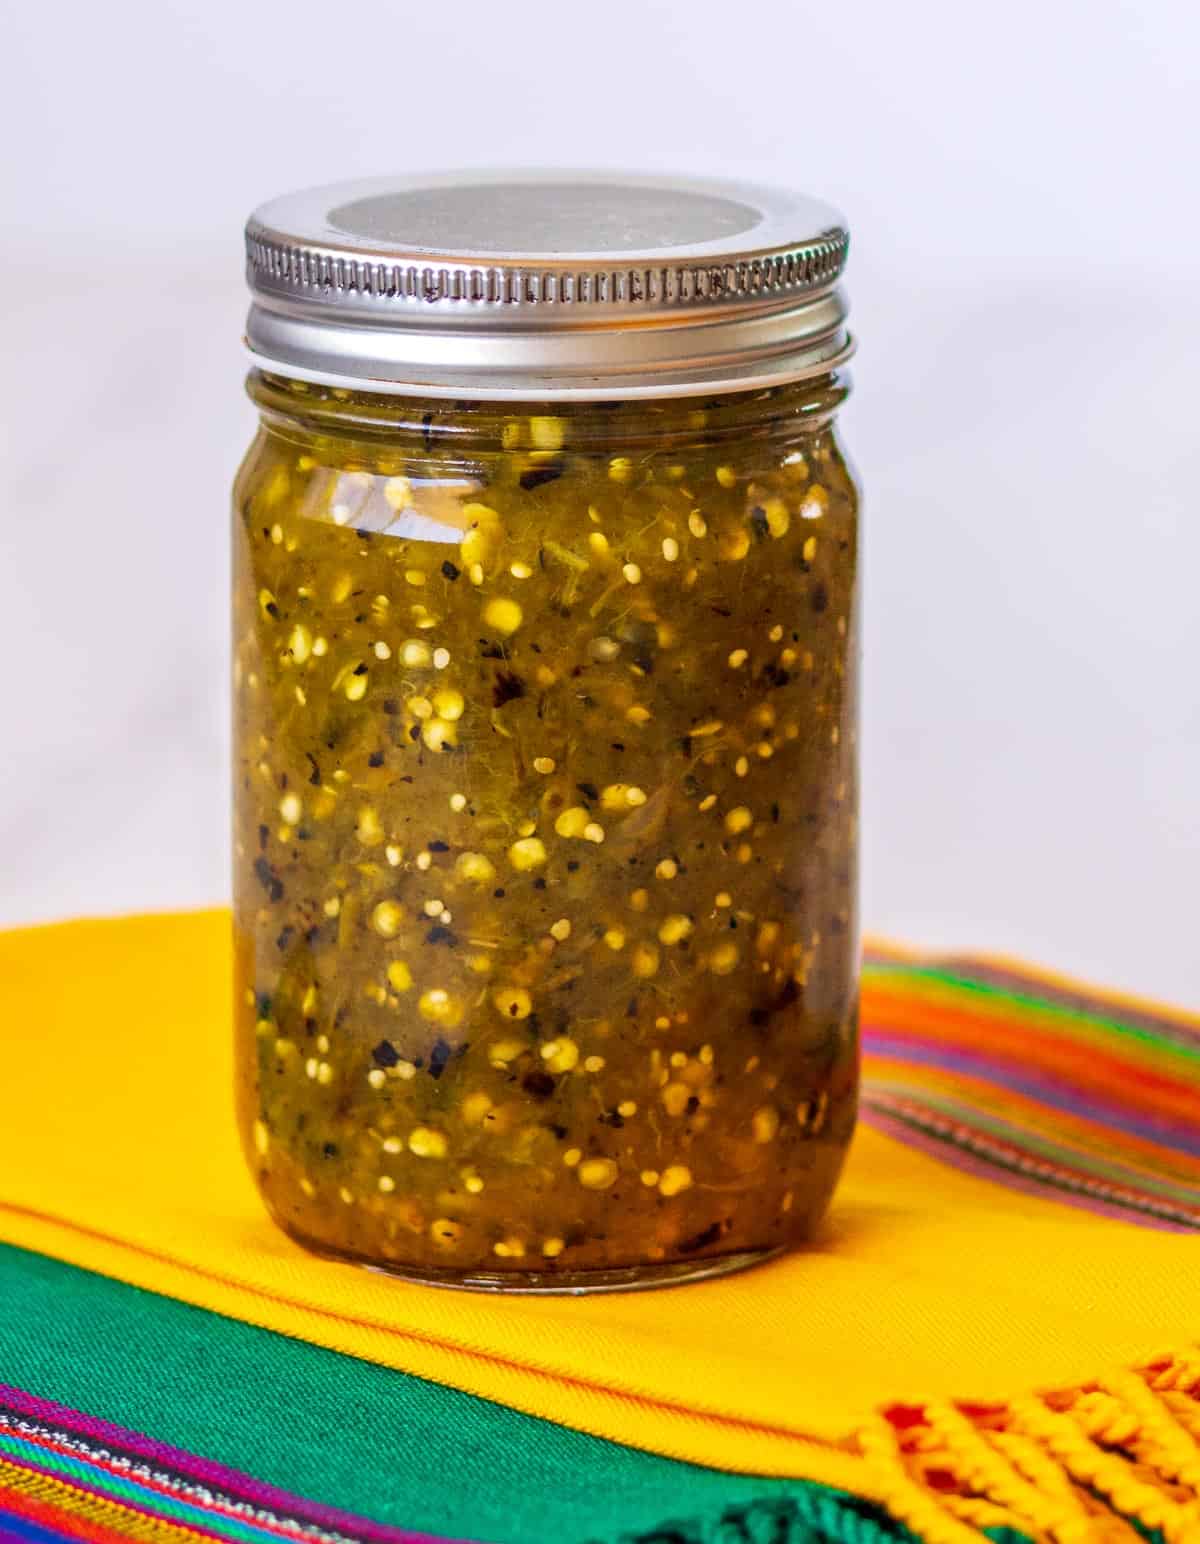 Fire roasted green salsa packed in jar.